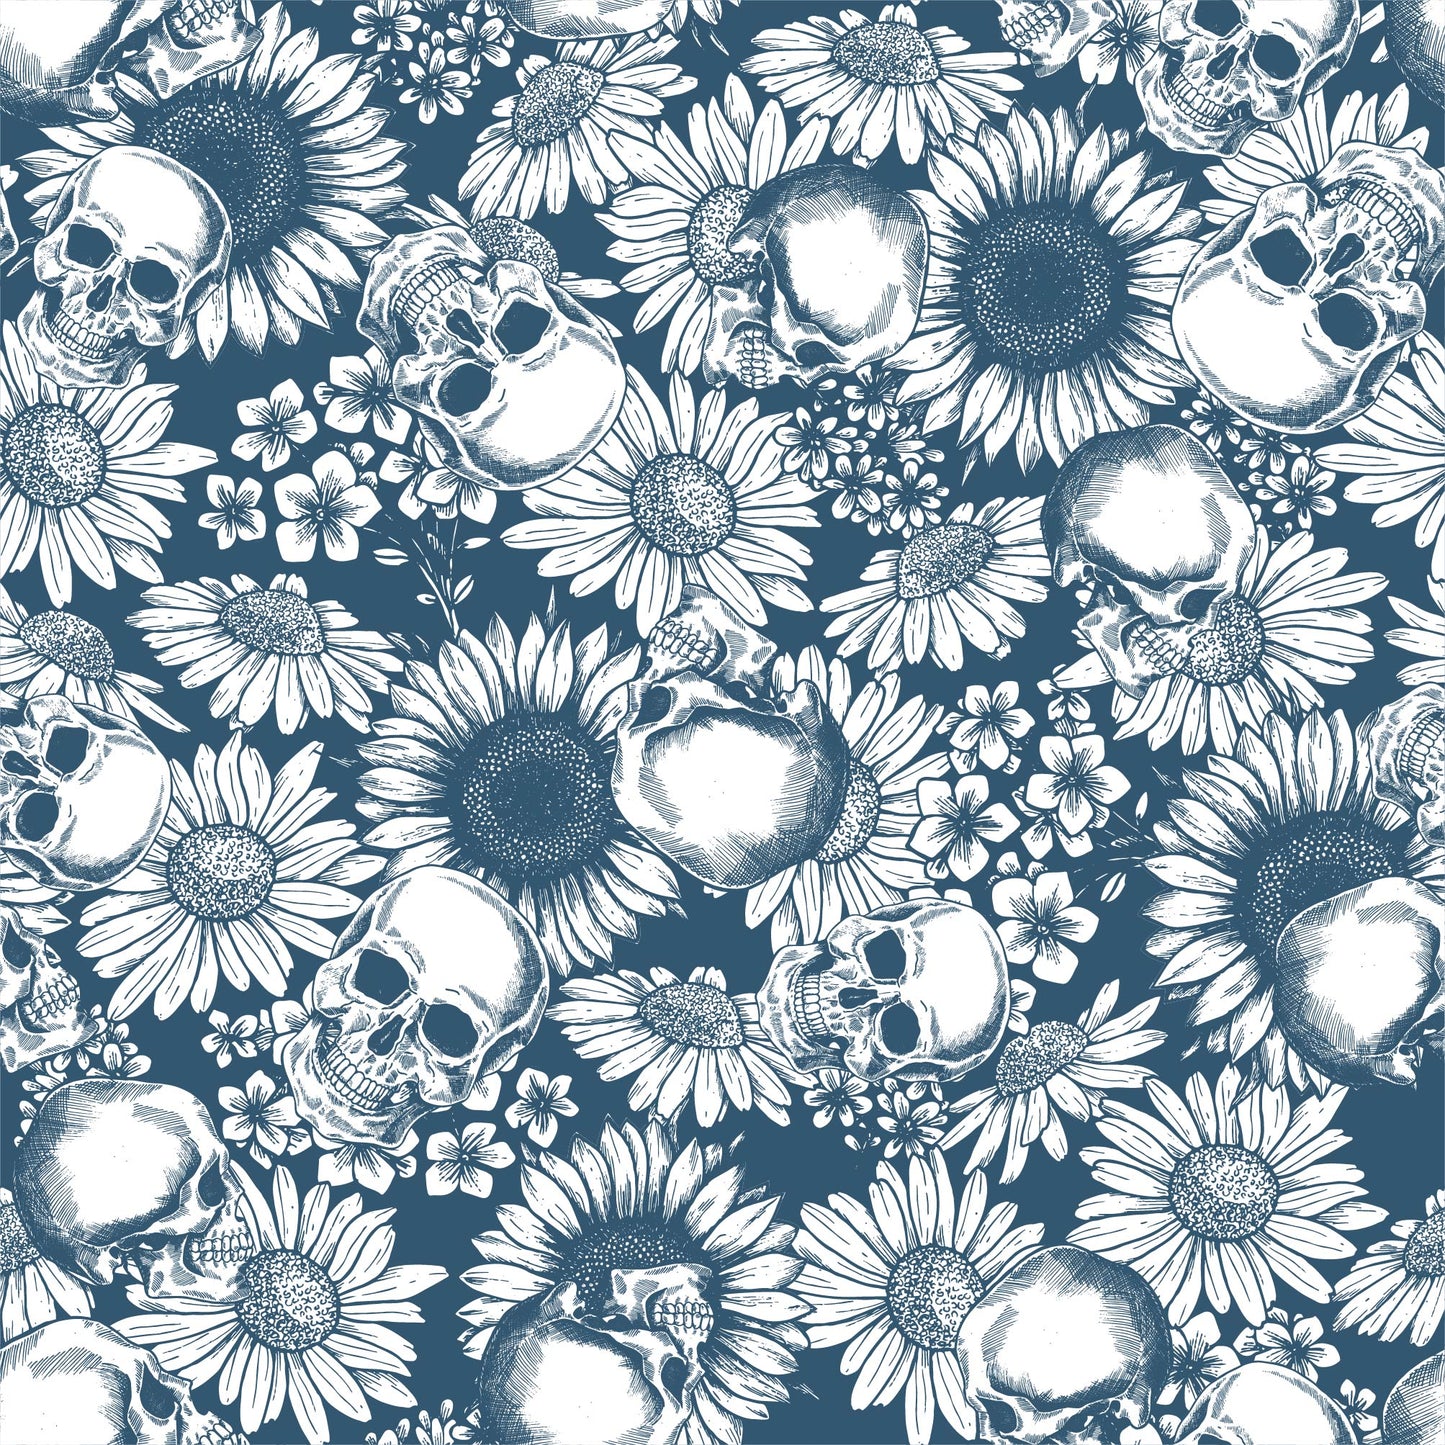 Blue Skulls & Flowers (Faux Leather - 8" x 13" Printed Sheet)